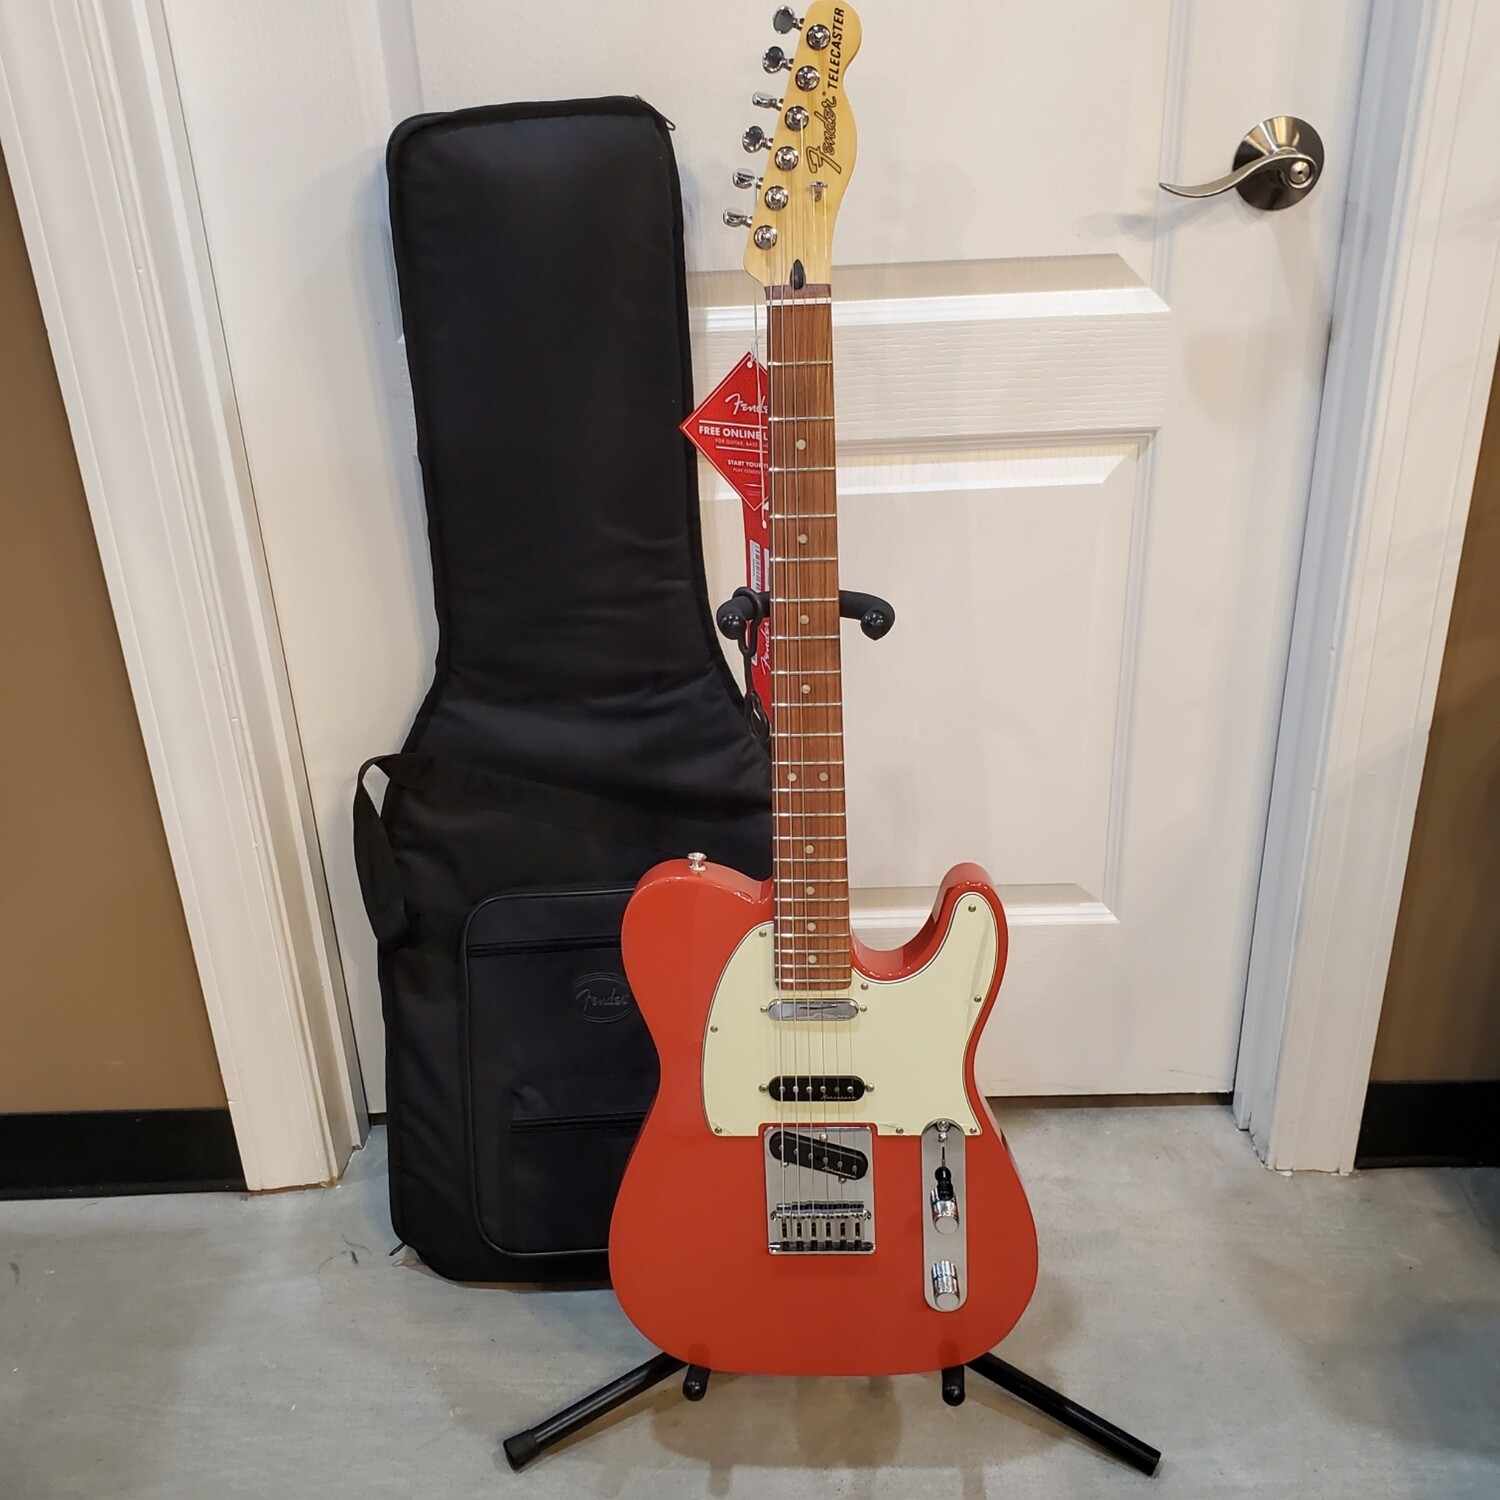 CONSIGNMENT: Fender Nashville Delux Telecaster Fiesta Red (in store purchase)